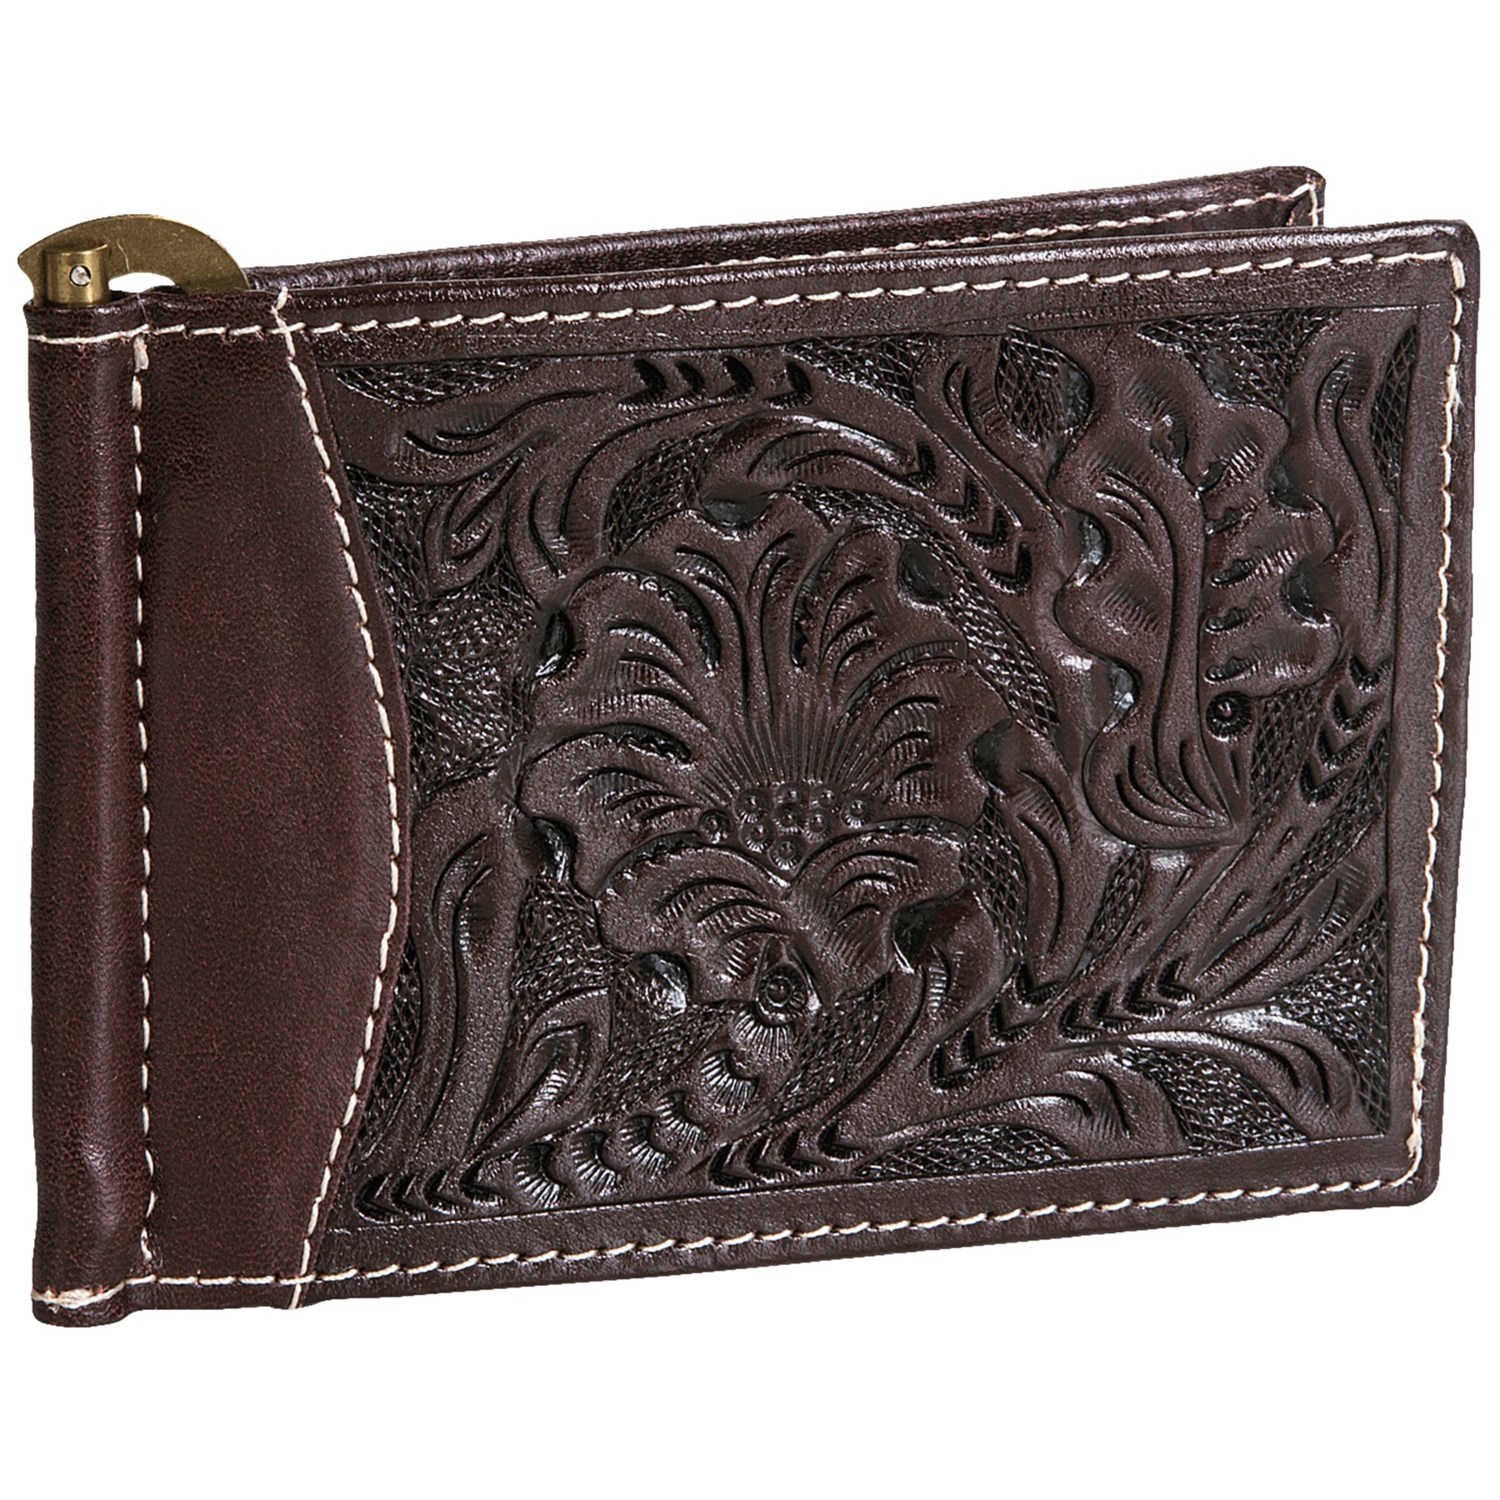 Roper Money Clip Wallet - Hand-Tooled Leather (For Men) - Save 39%